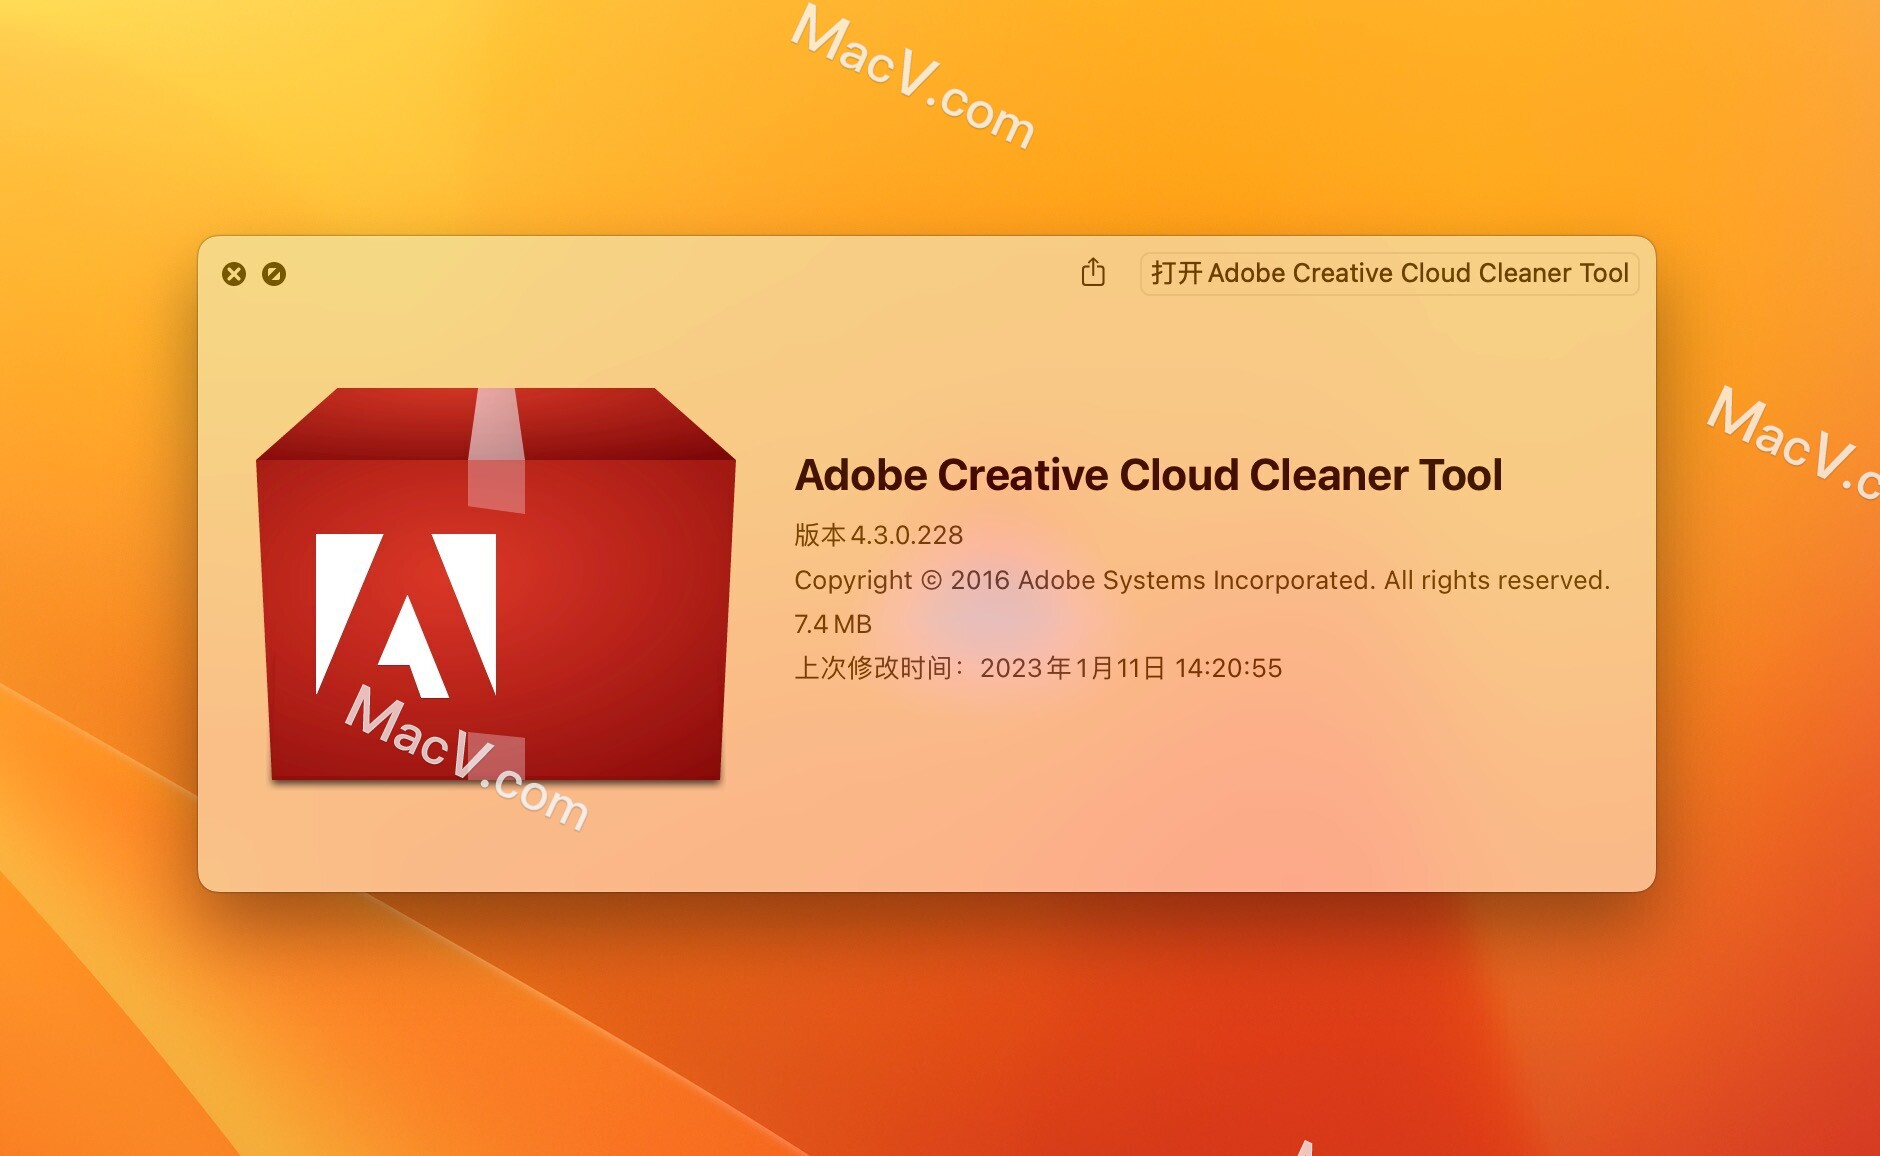 download the last version for mac Adobe Creative Cloud Cleaner Tool 4.3.0.395